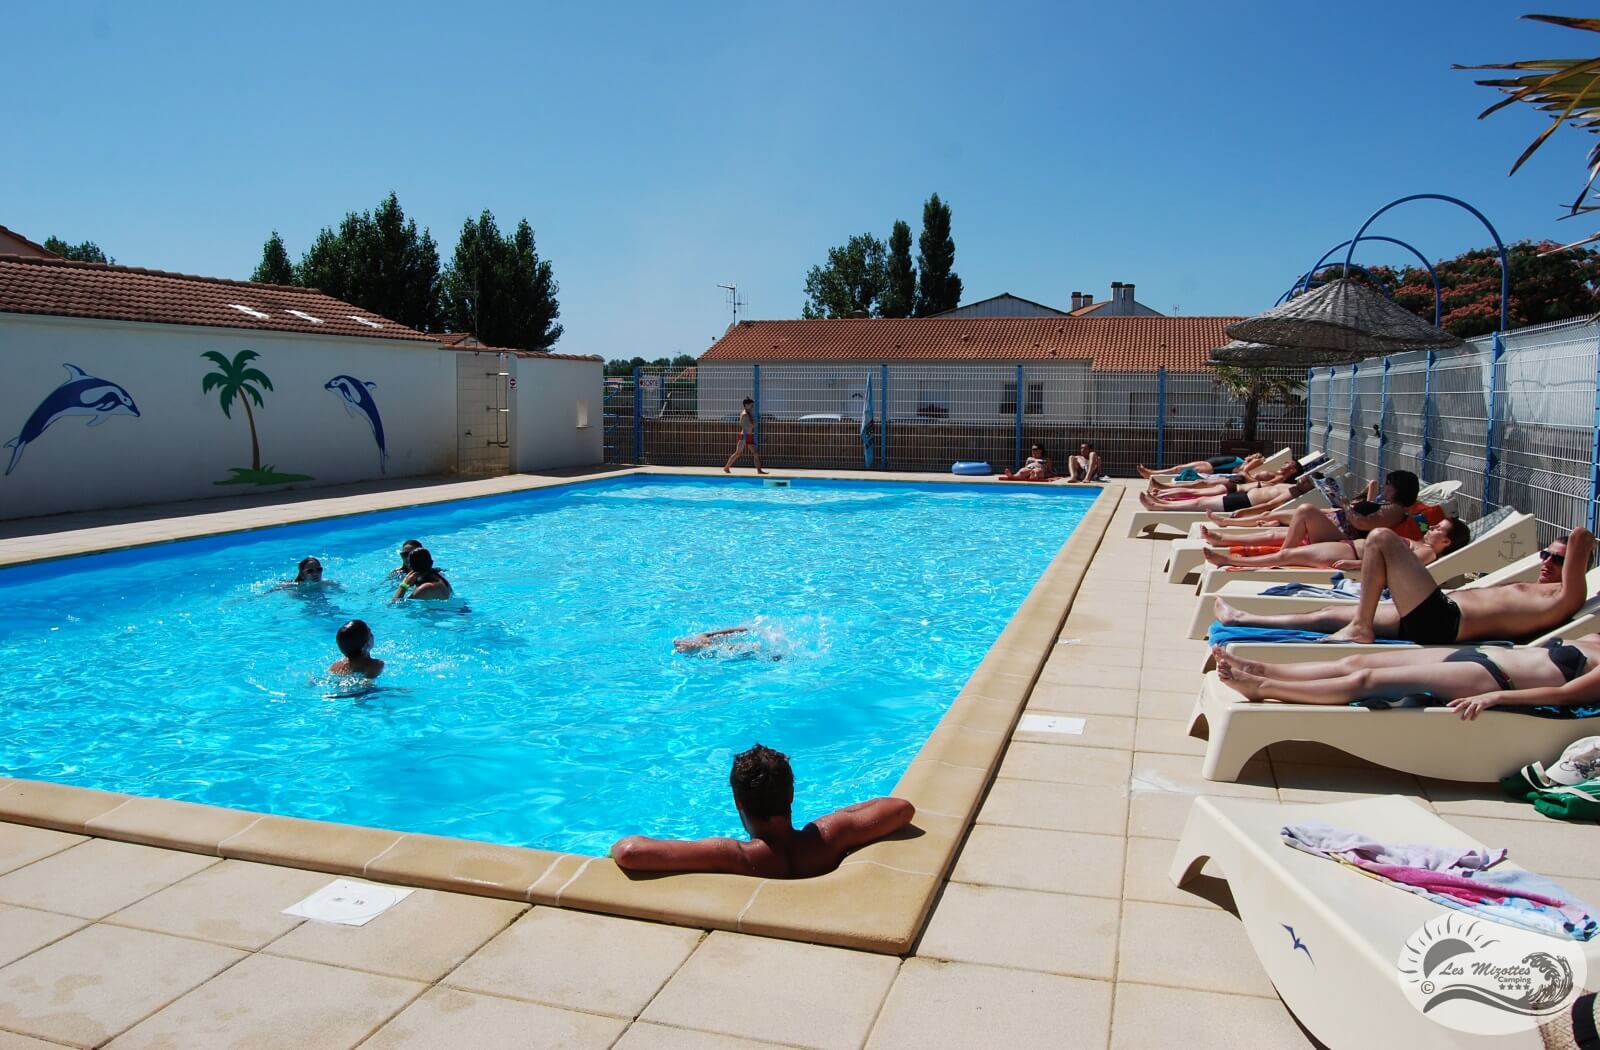 Outdoor Pool with Paddling pool